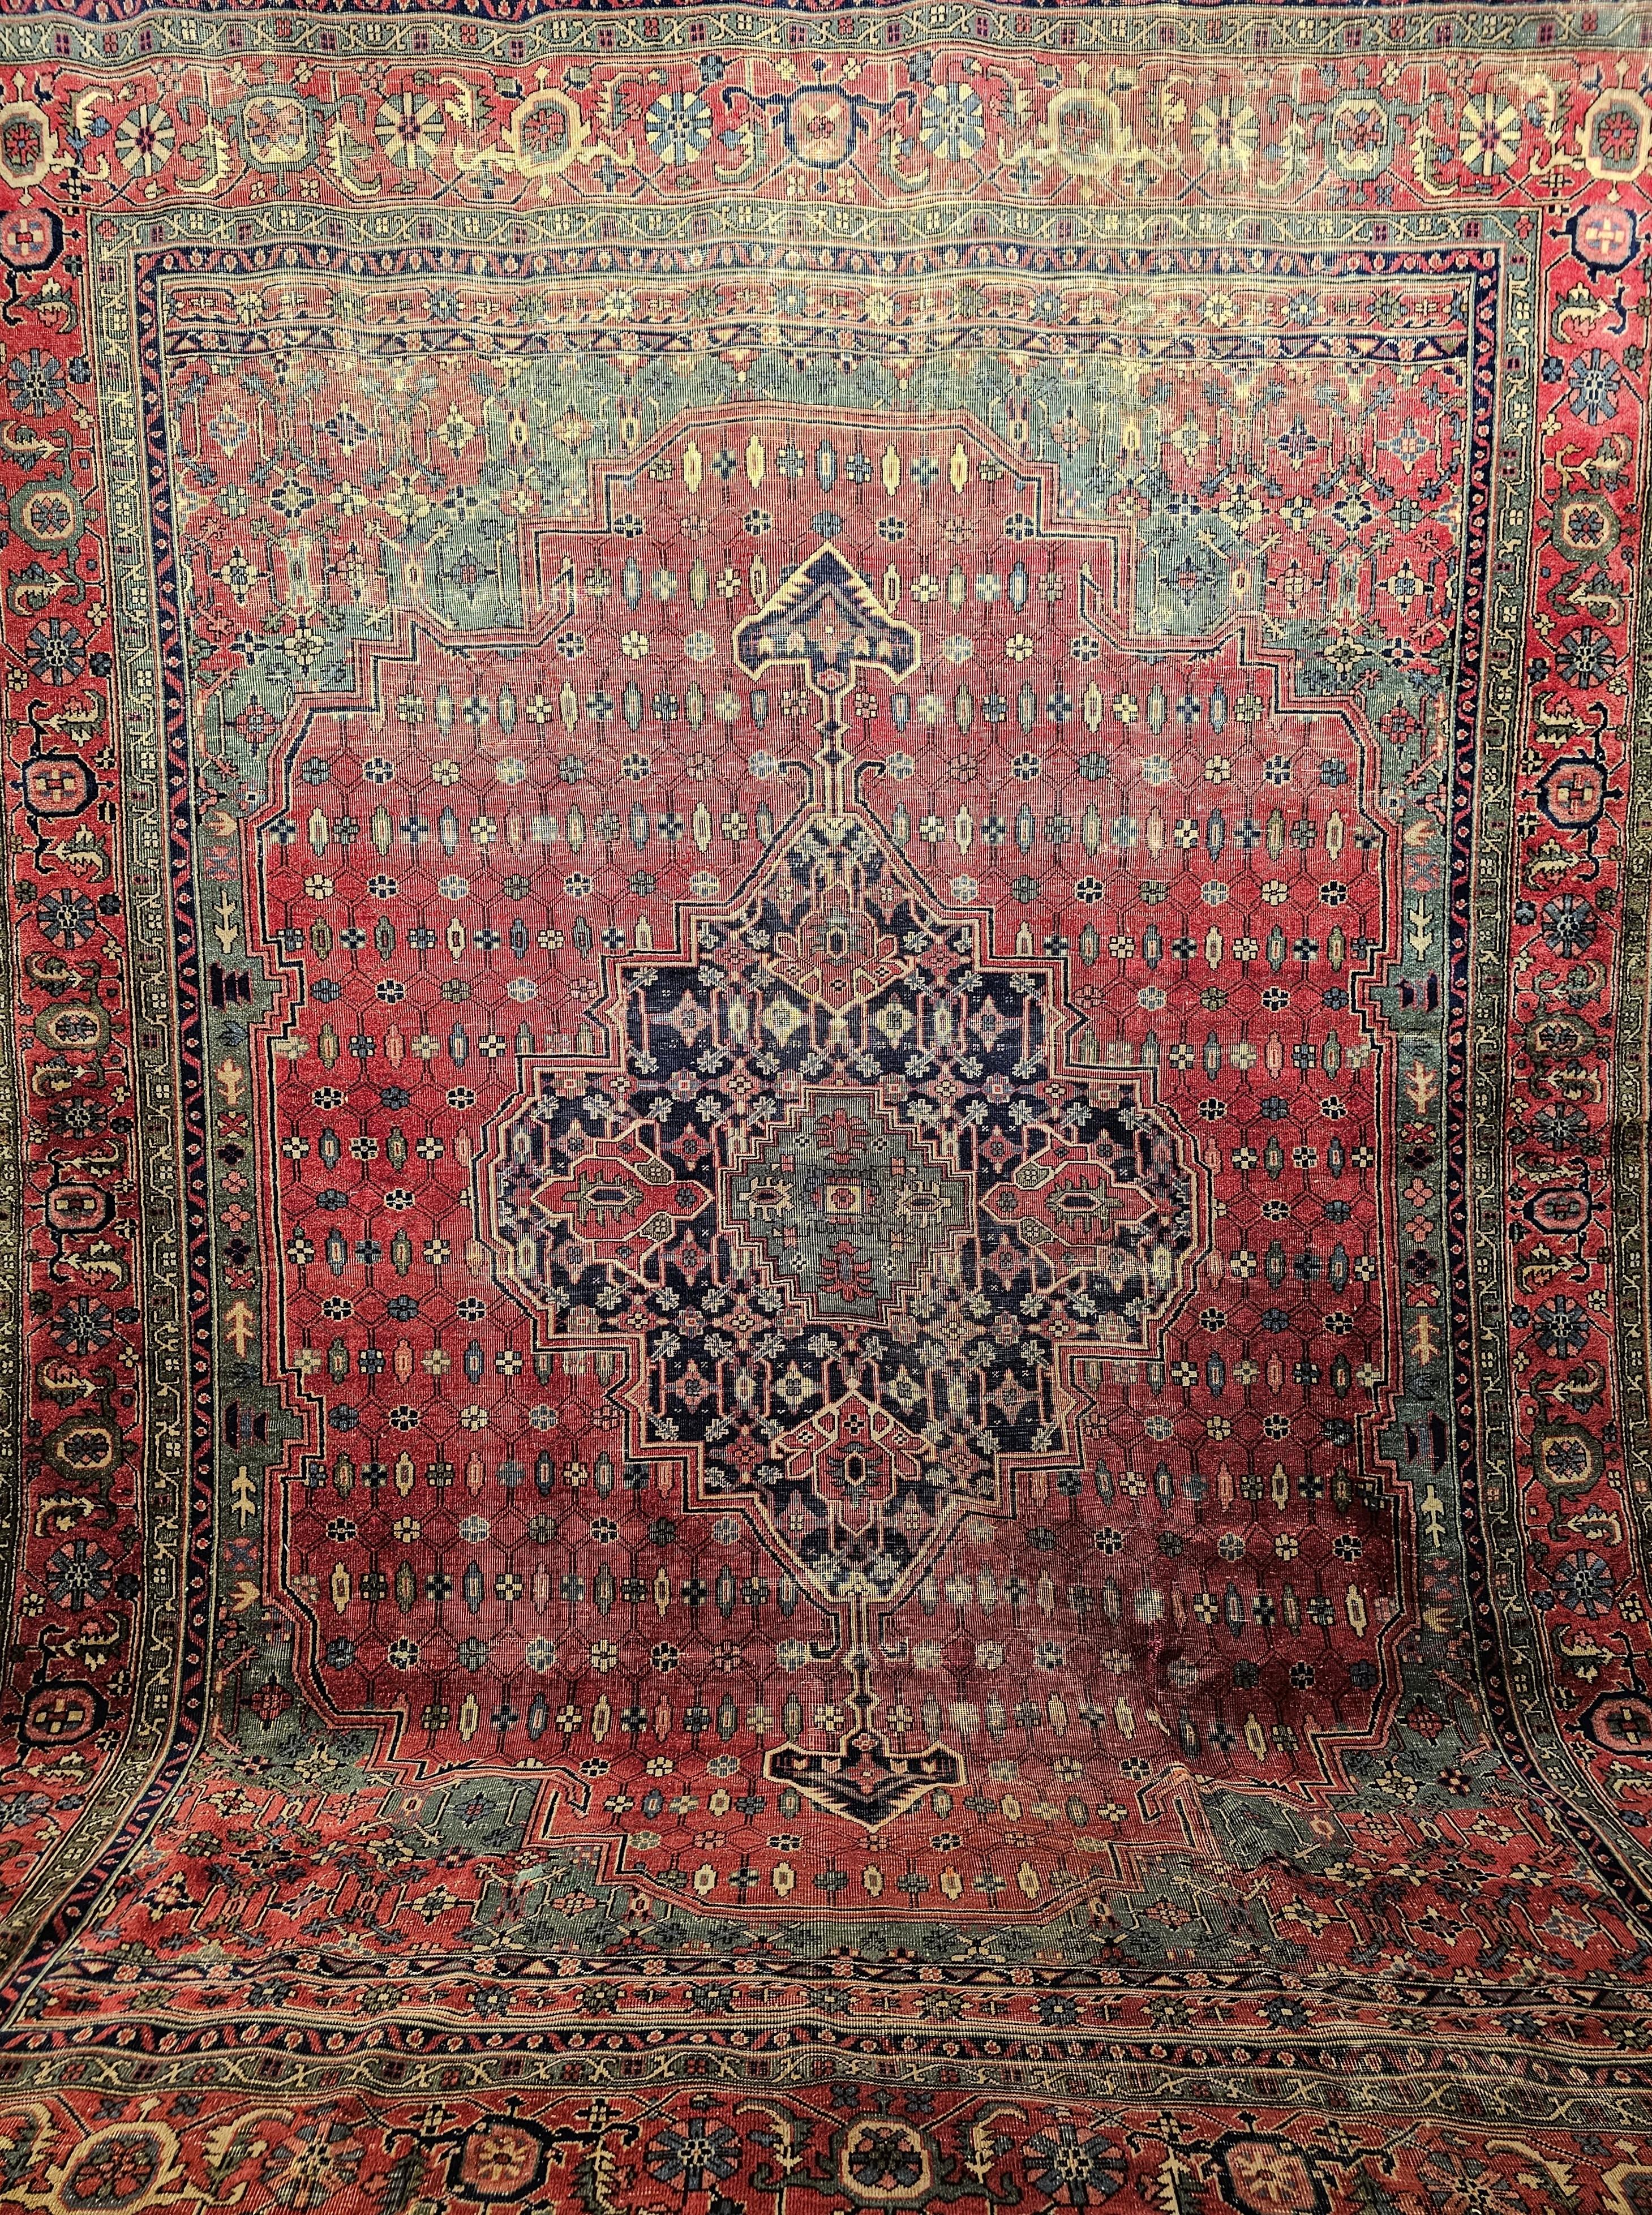  A Turkish rug in the Persian Heriz geometric medallion design.  The  room size rug has a beautiful and unique design and great colors.  The rug has a central medallion in navy blue, red and green colors set in a red color field.  The small